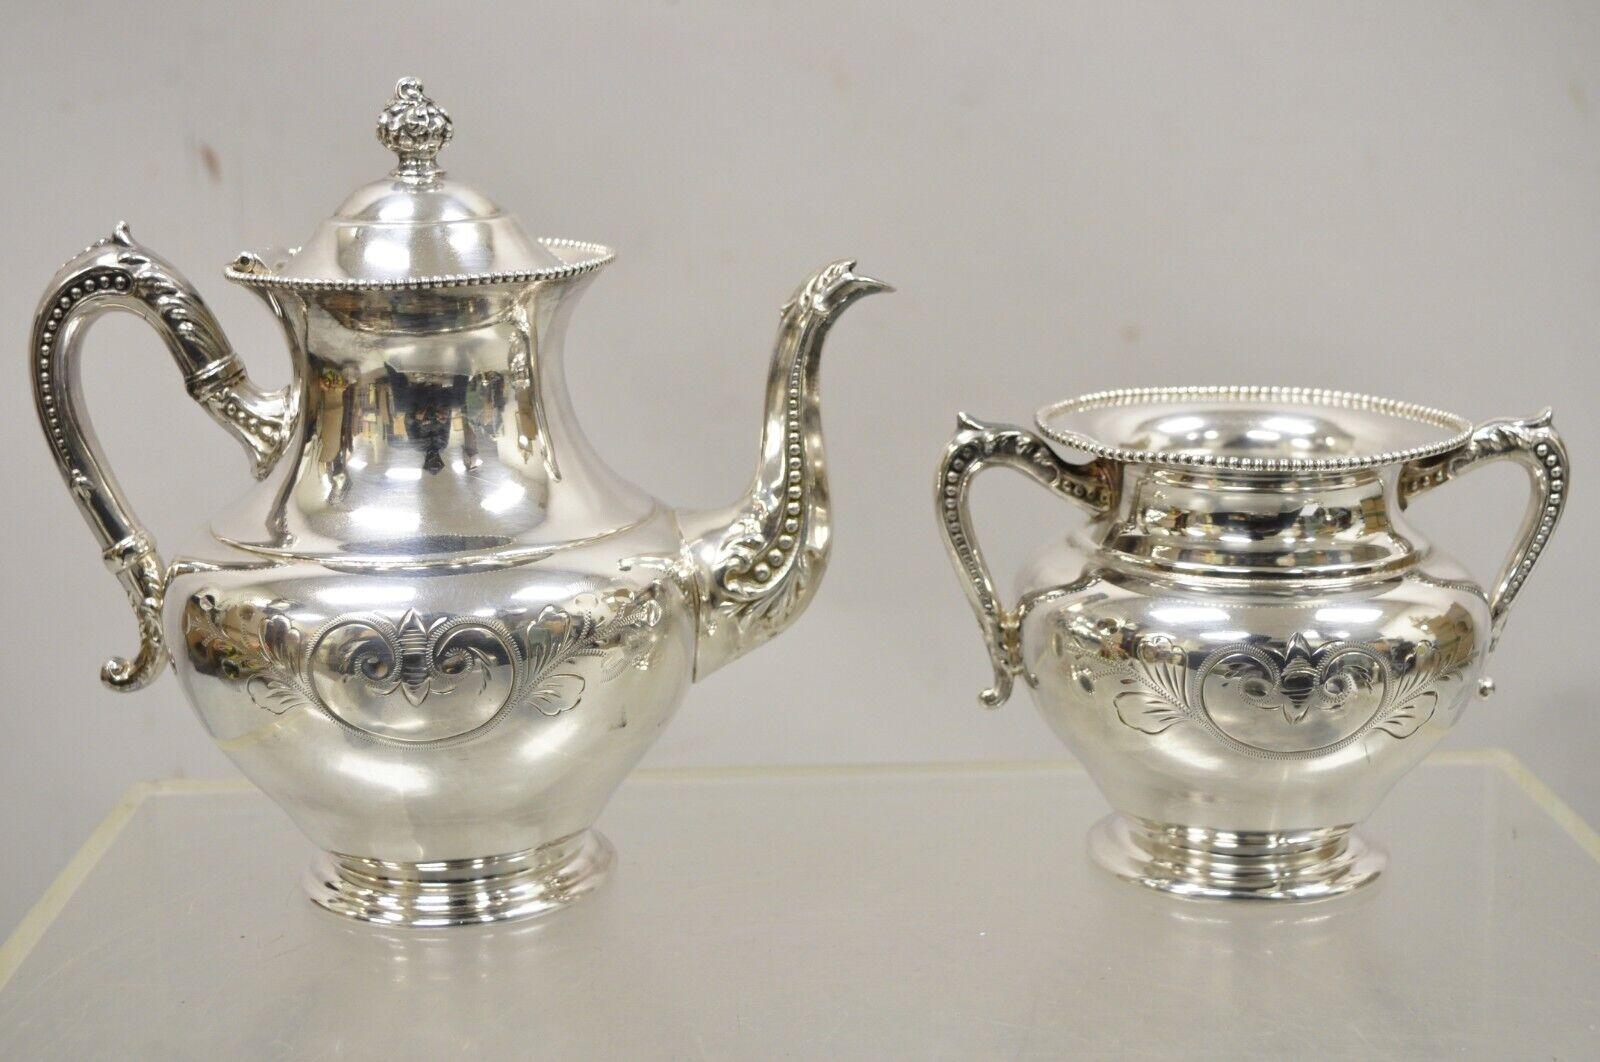 Antique Manhattan silver plate co silver plated tea serving set - 4pc set. Item features (1) Tea pot, (1) covered sugar bowl, (1) creamer, (1) open sugar bowl, fancy scrolling etch work throughout, original stamp, very nice antique set. Circa Early